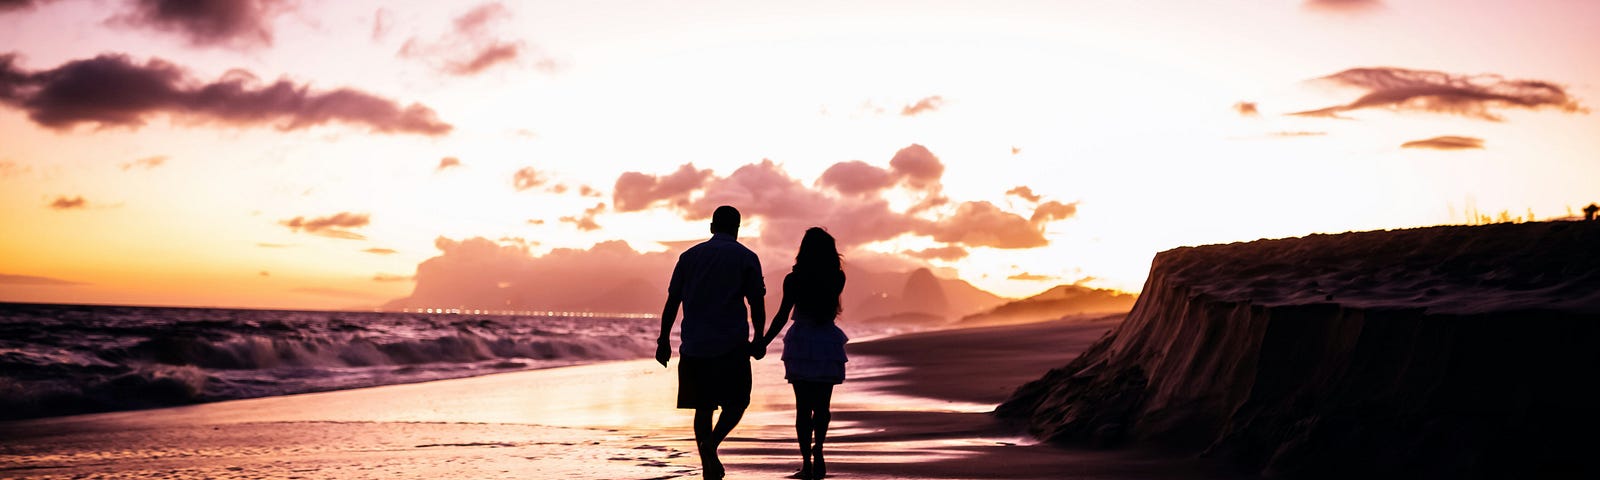 A silhoutted couple walk hand in hand along the waters edge on a sunset beach